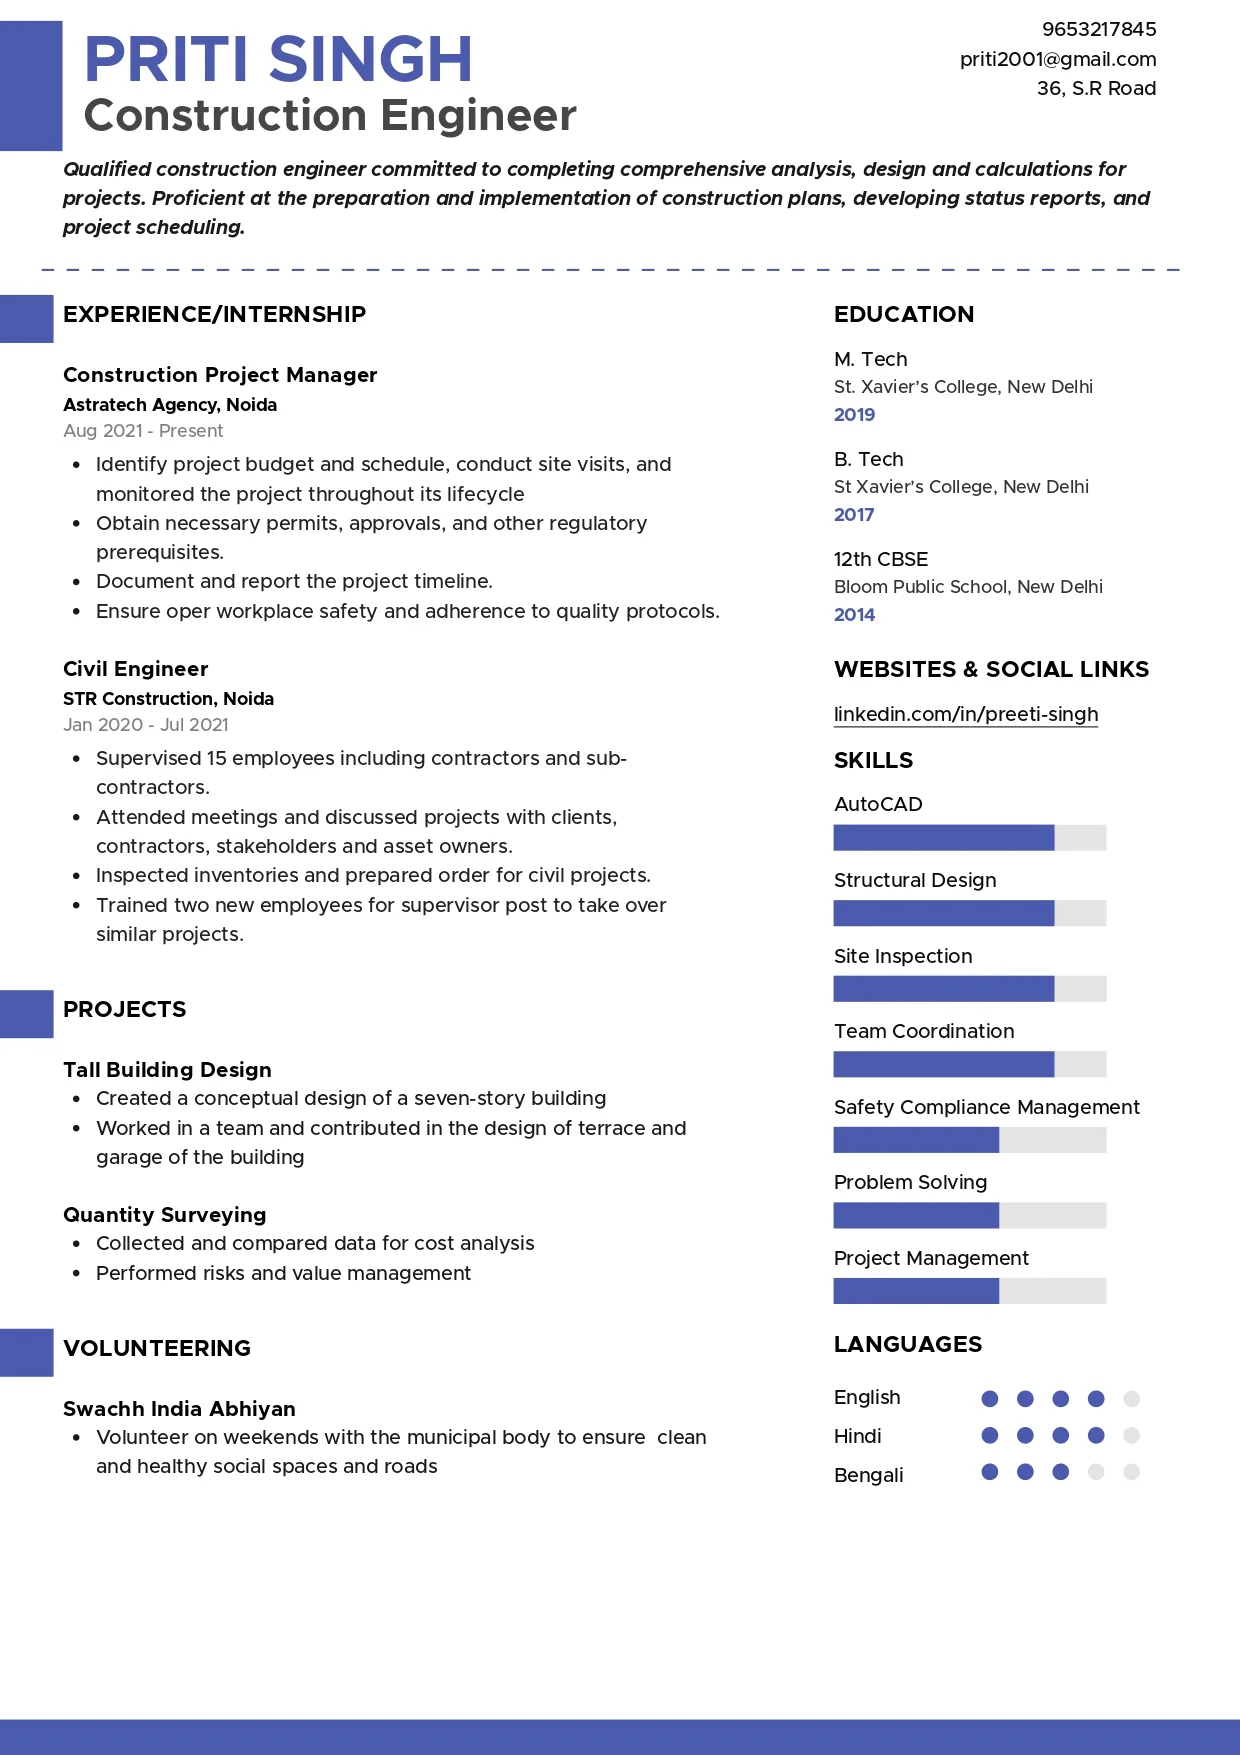 Sample Resume of Construction Engineer | Free Resume Templates & Samples on Resumod.co